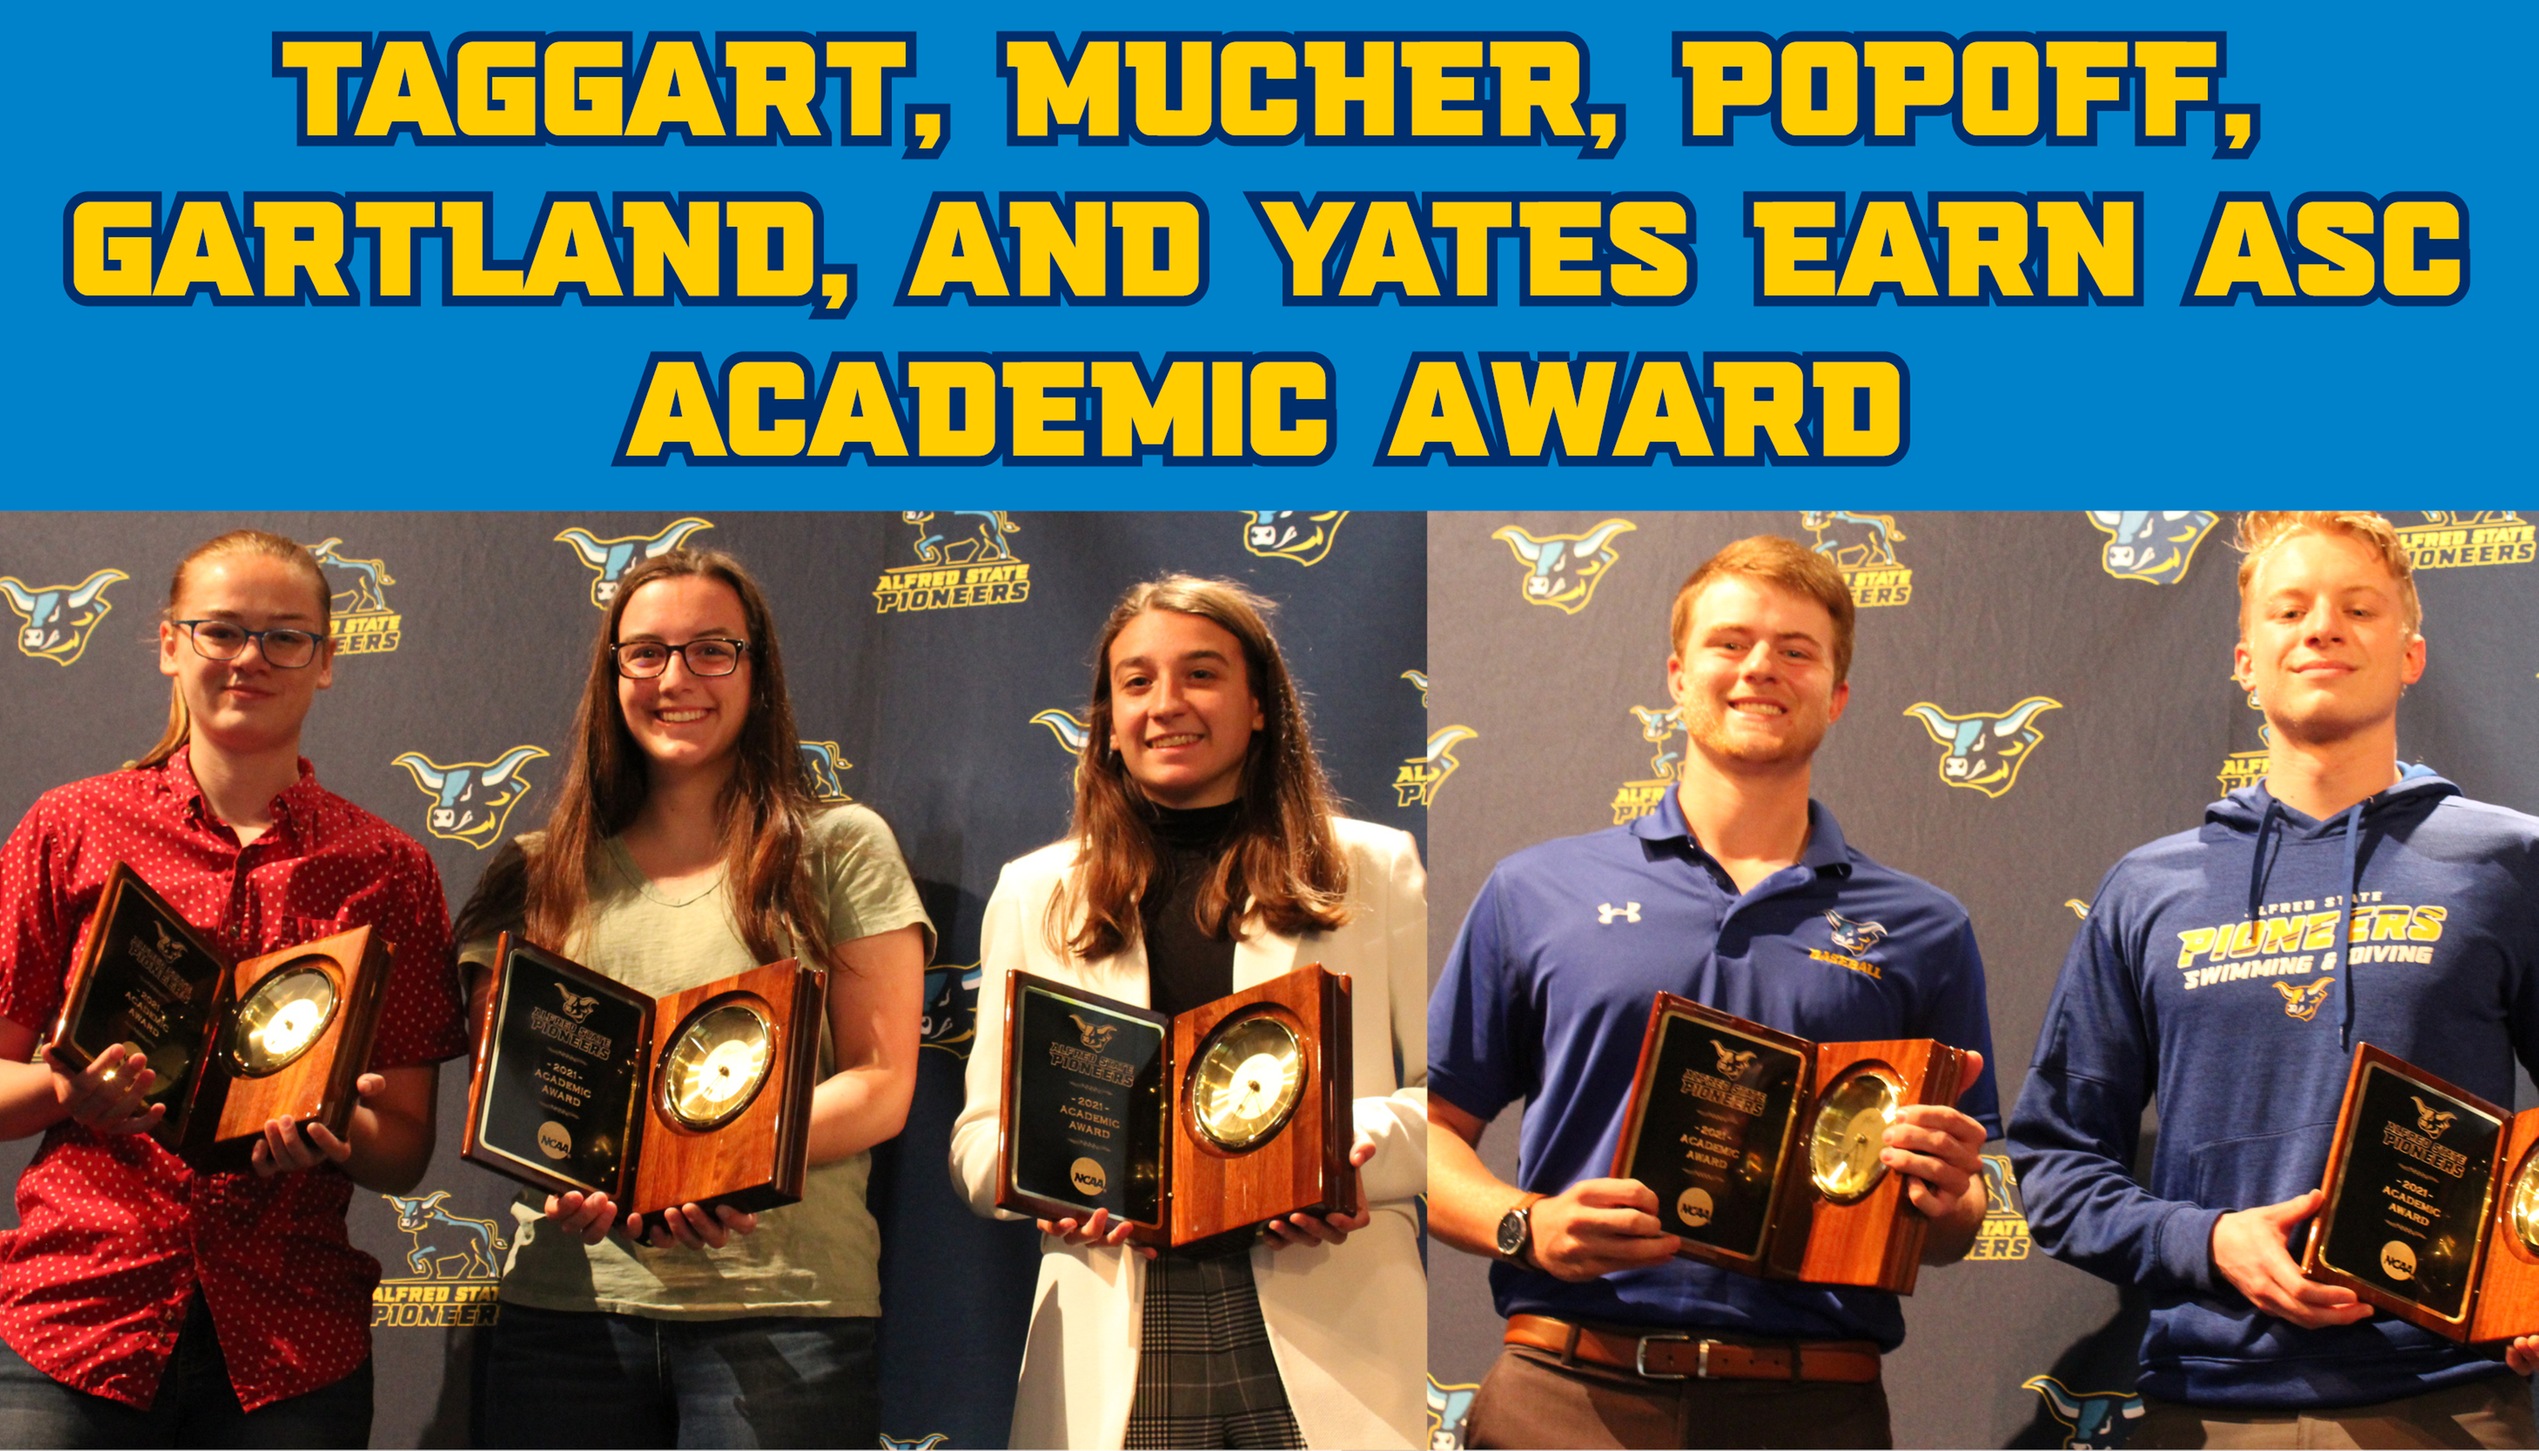 Pictured are the winners of the 2021 Alfred State Academic Award. 

From left to right - Emma Taggart, Riley Mucher, Isabelle Popoff, AJ Gartland, and Stuart Yates